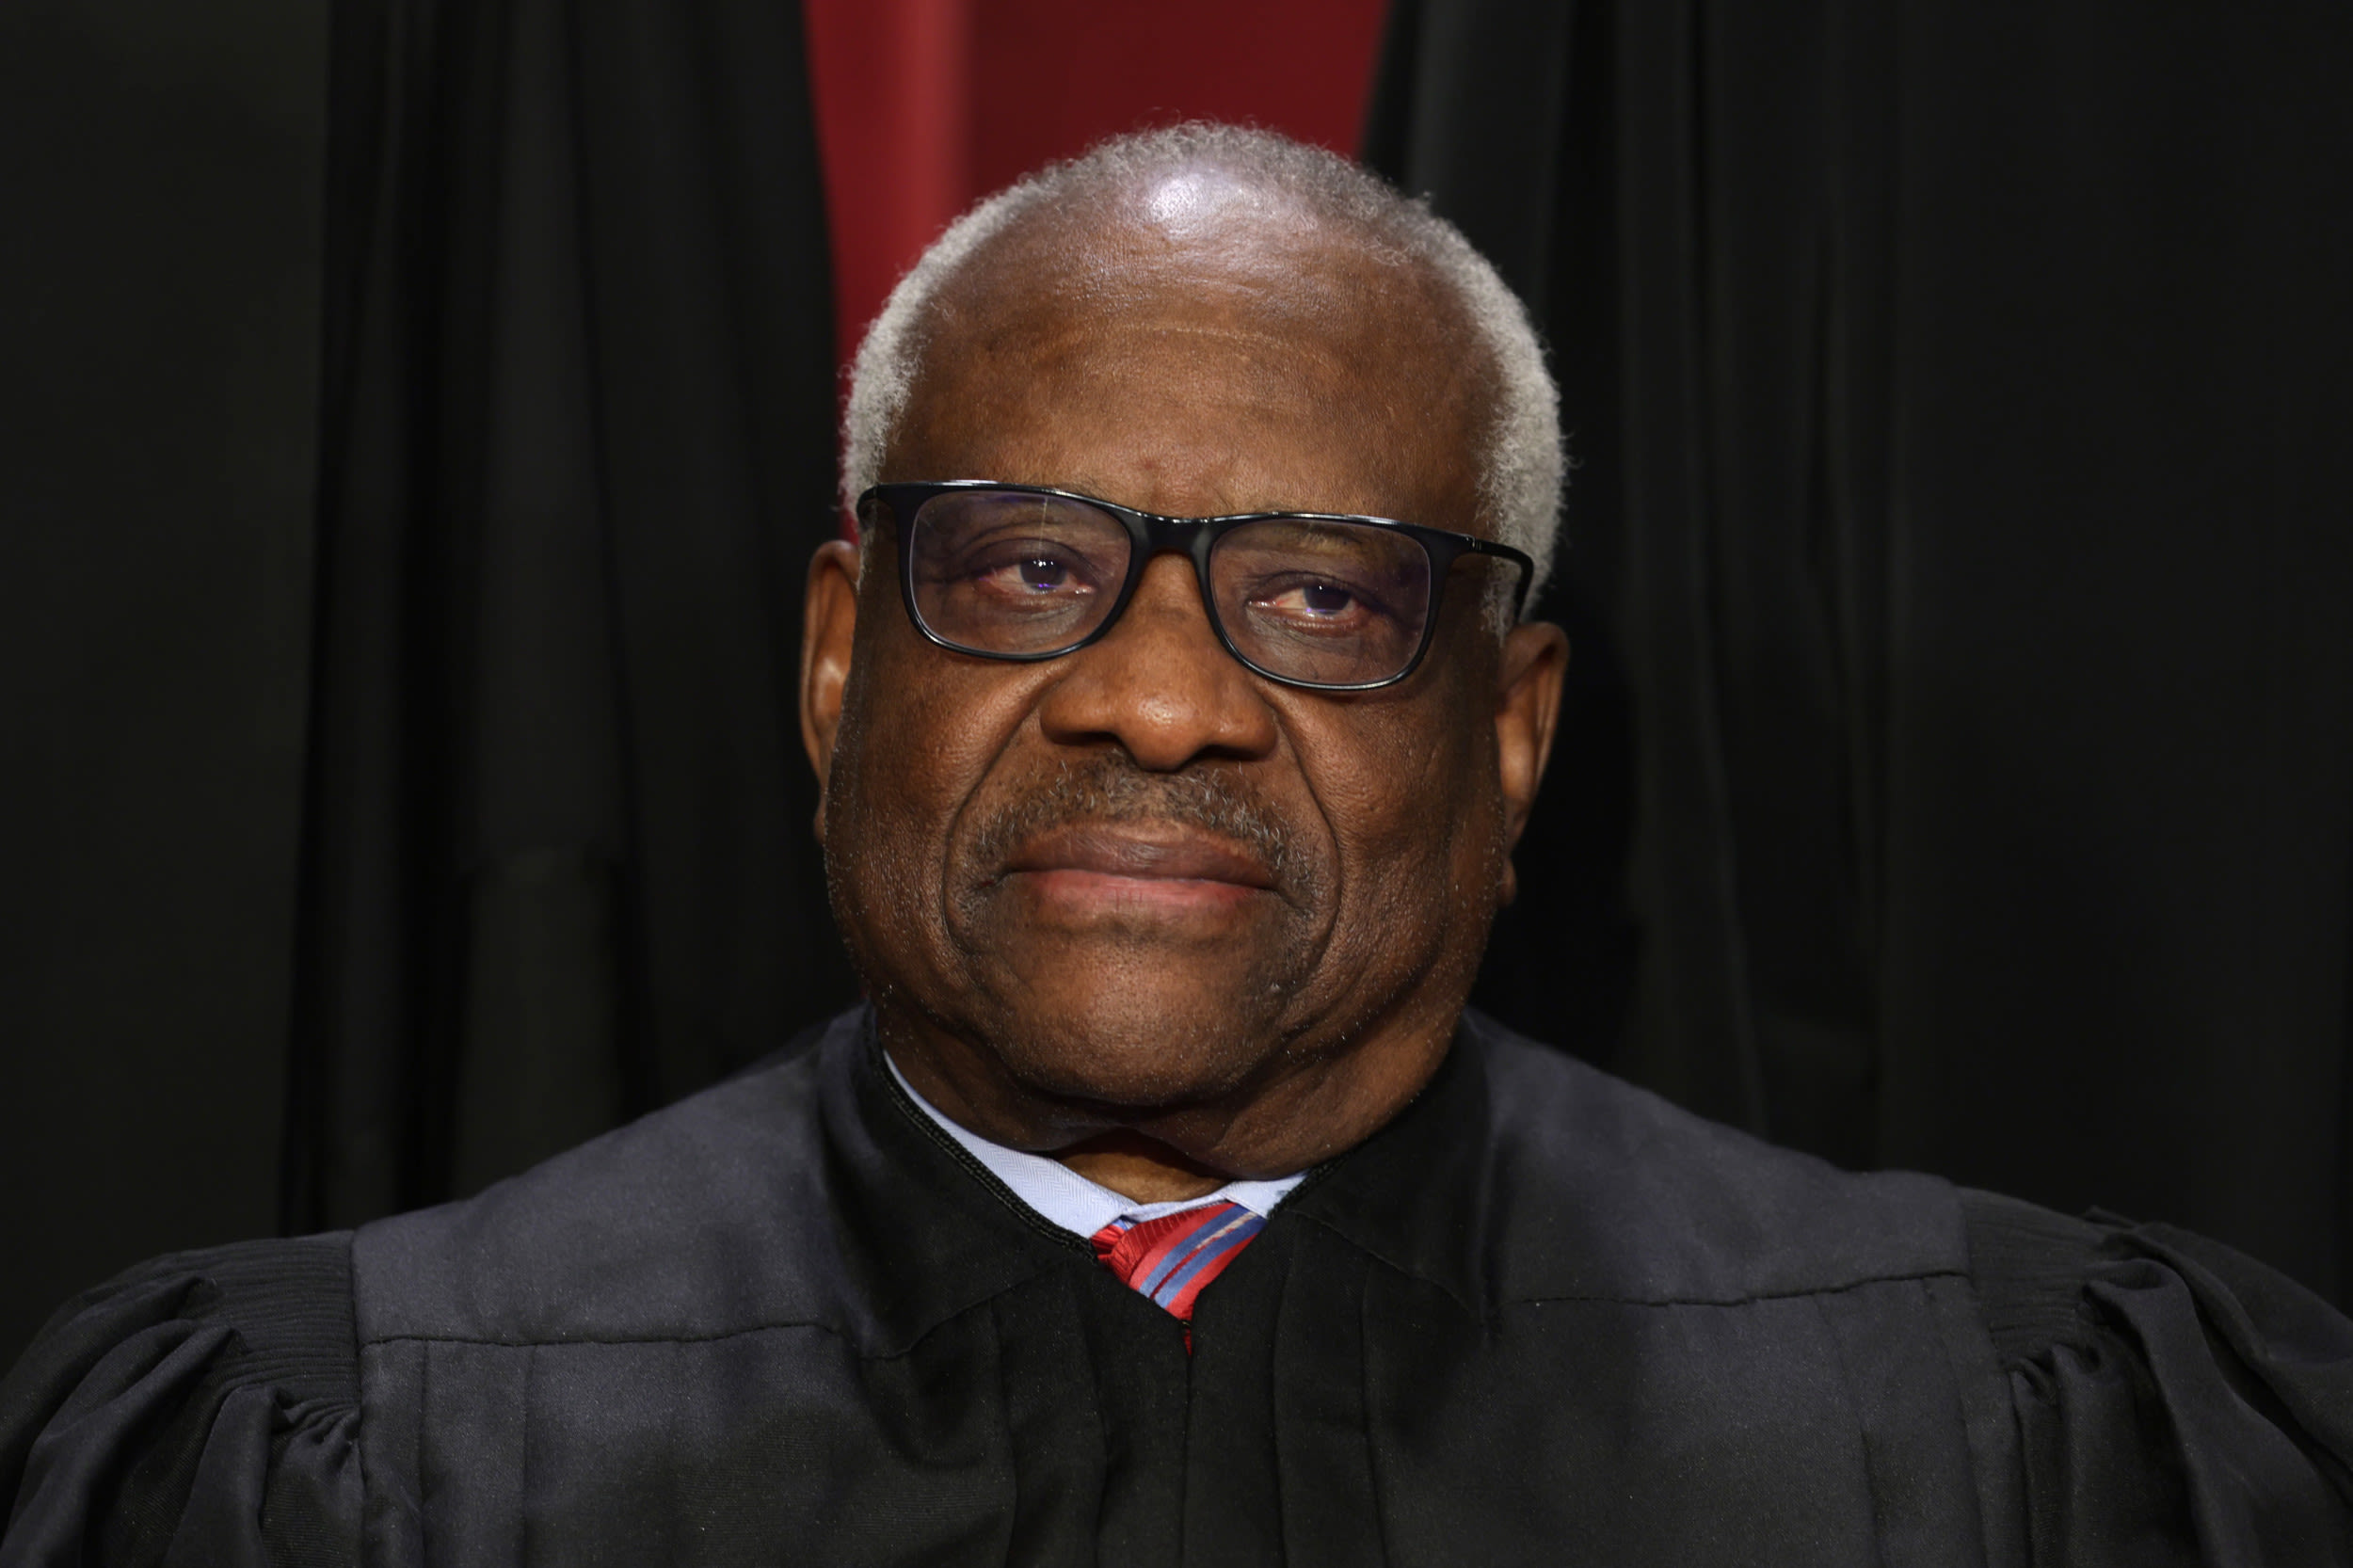 Clarence Thomas "word games" in ruling sparks criticism